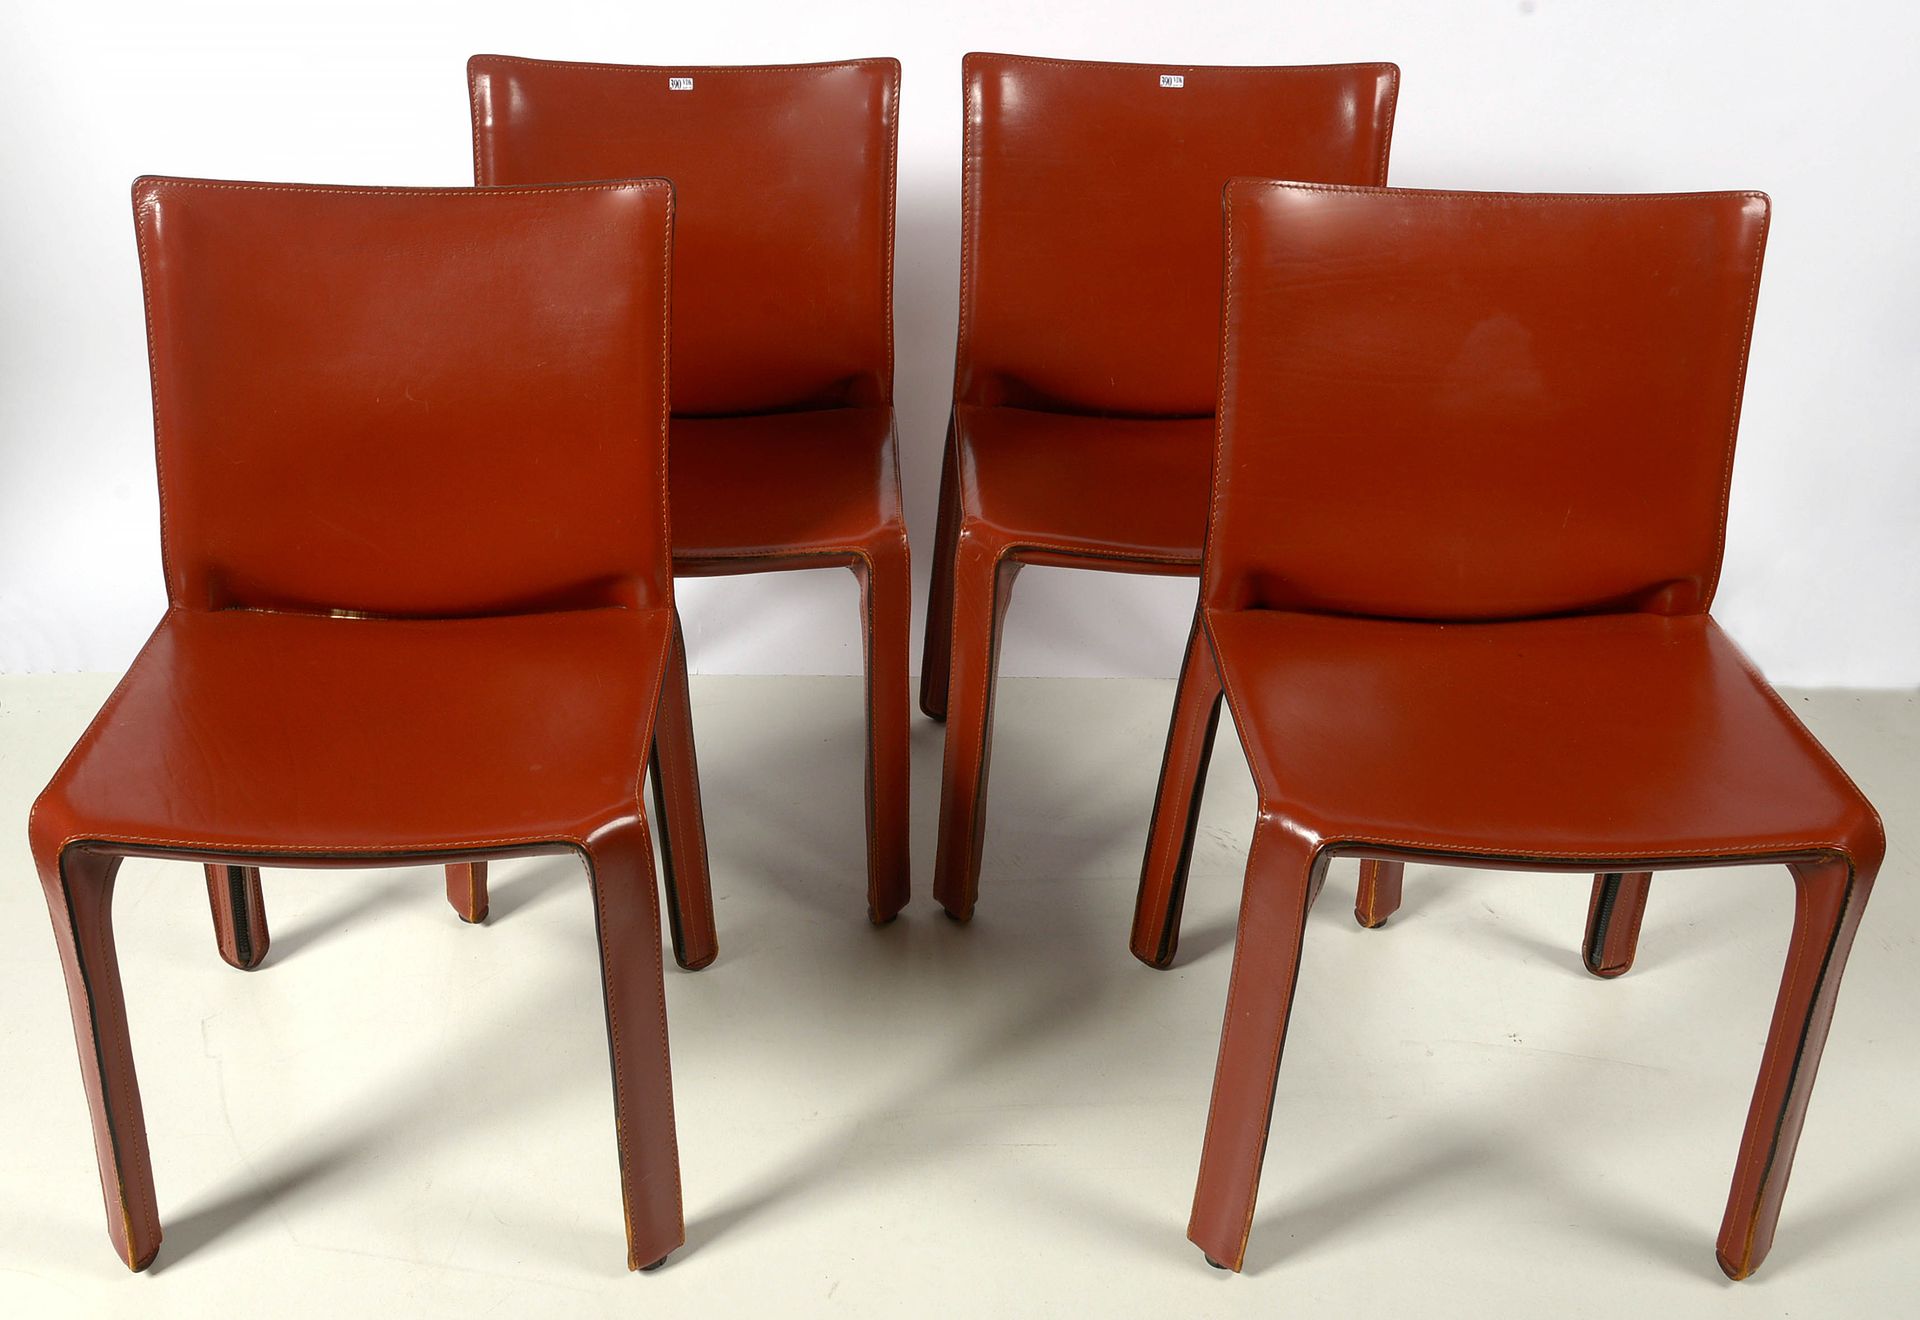 BELLINI Mario (1935) Suite of 4 Cab chairs upholstered in cognac leather. Model &hellip;